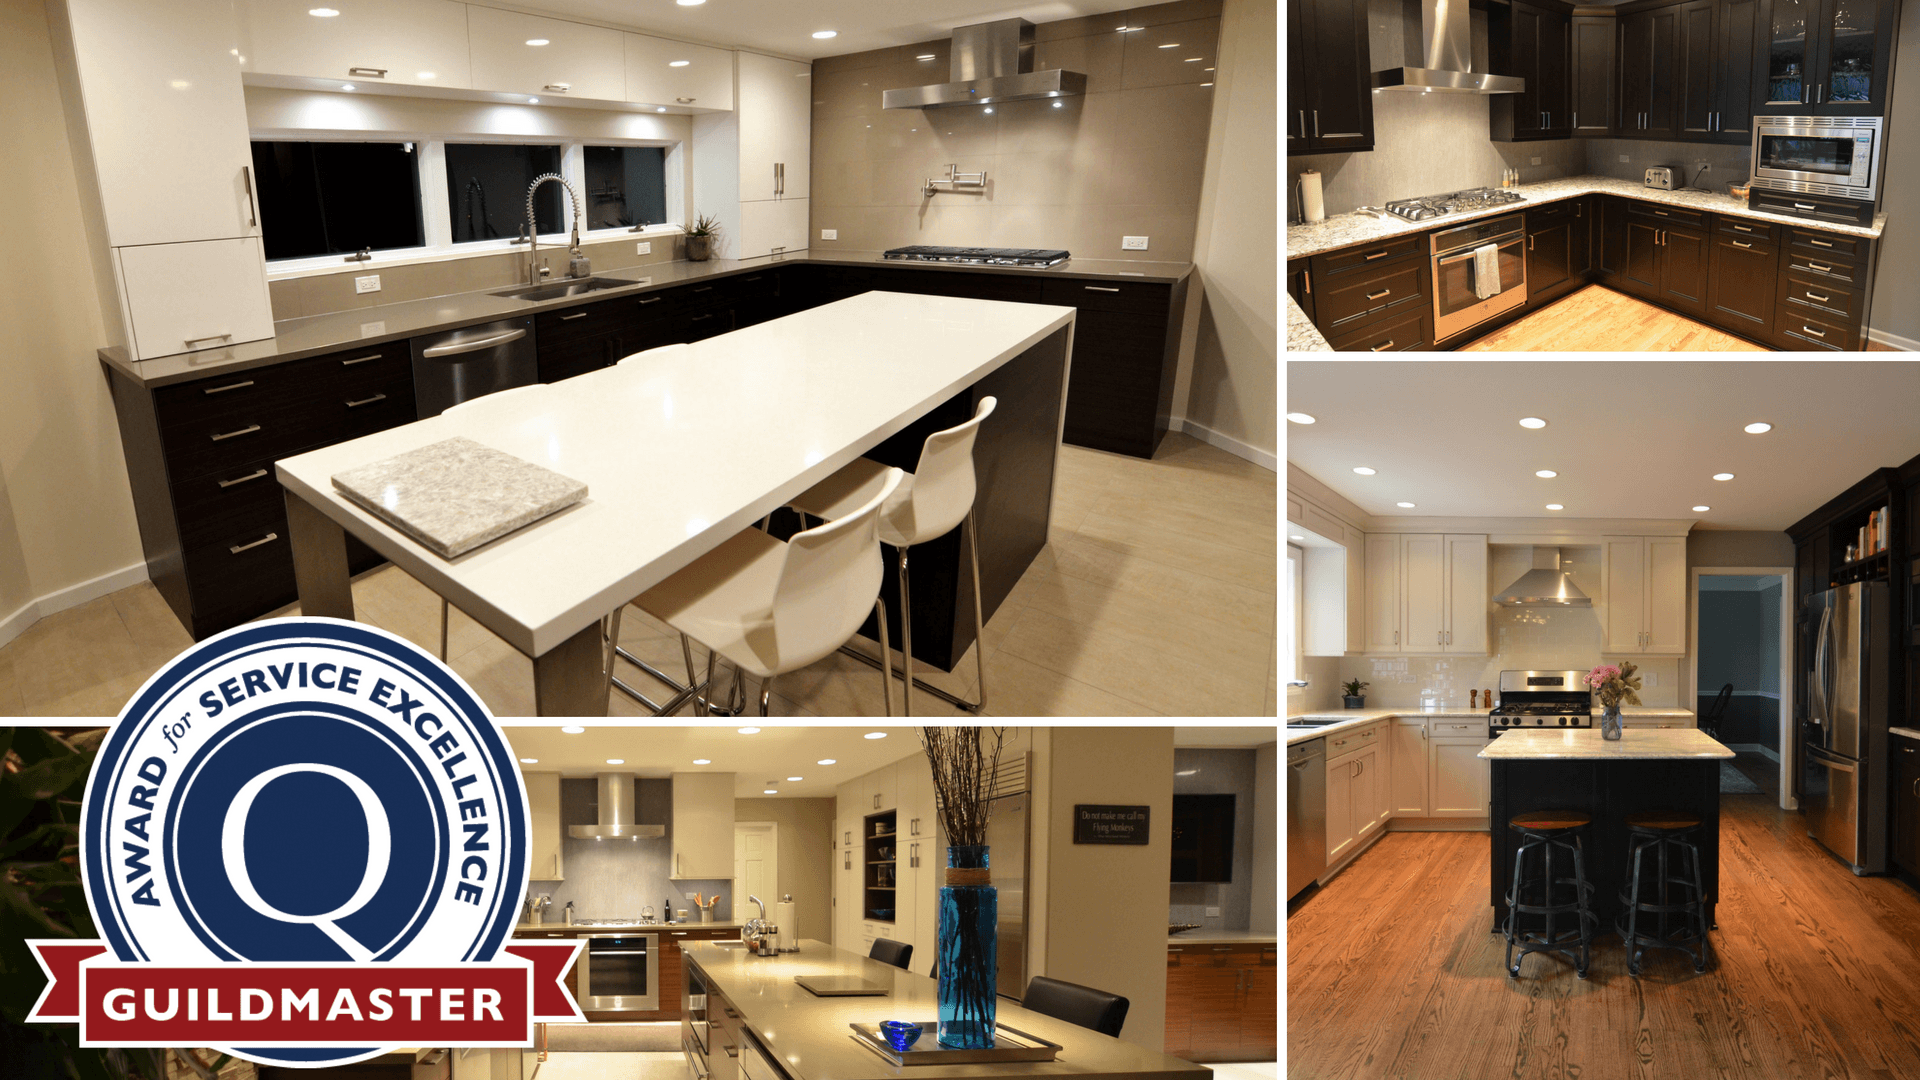 the kitchen master award for service excellence from guildmaster kitchen renovations